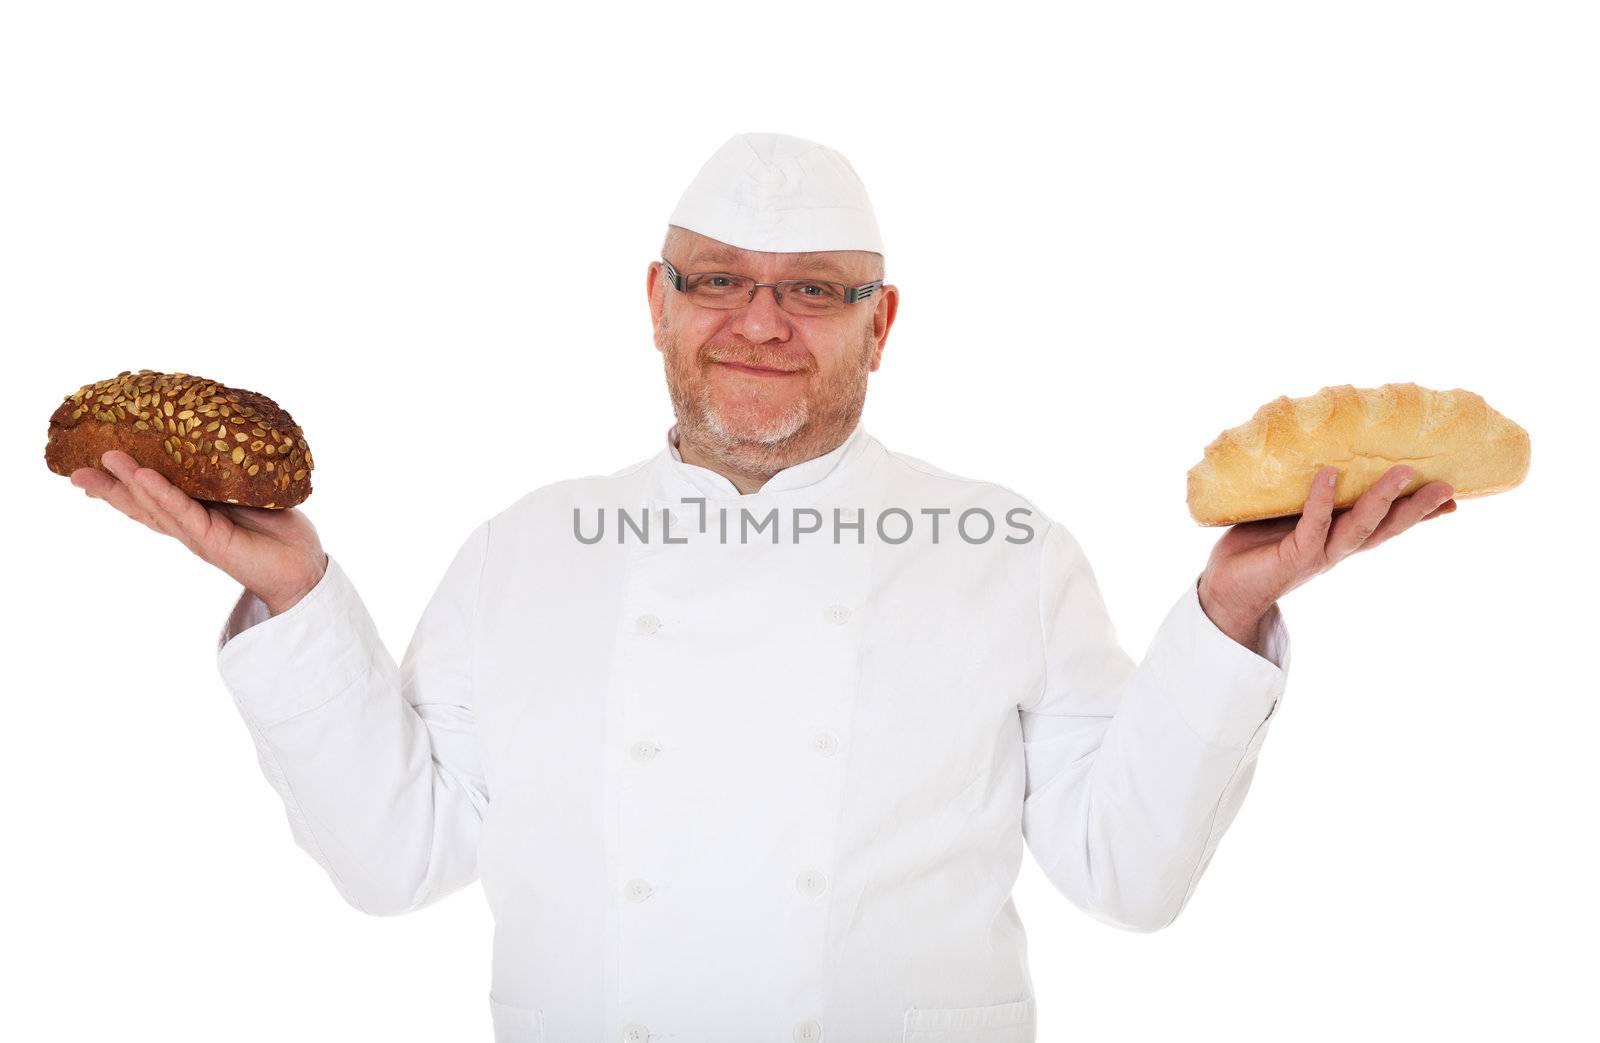 Baker holding white bread and wholewheat bread. All on white background.